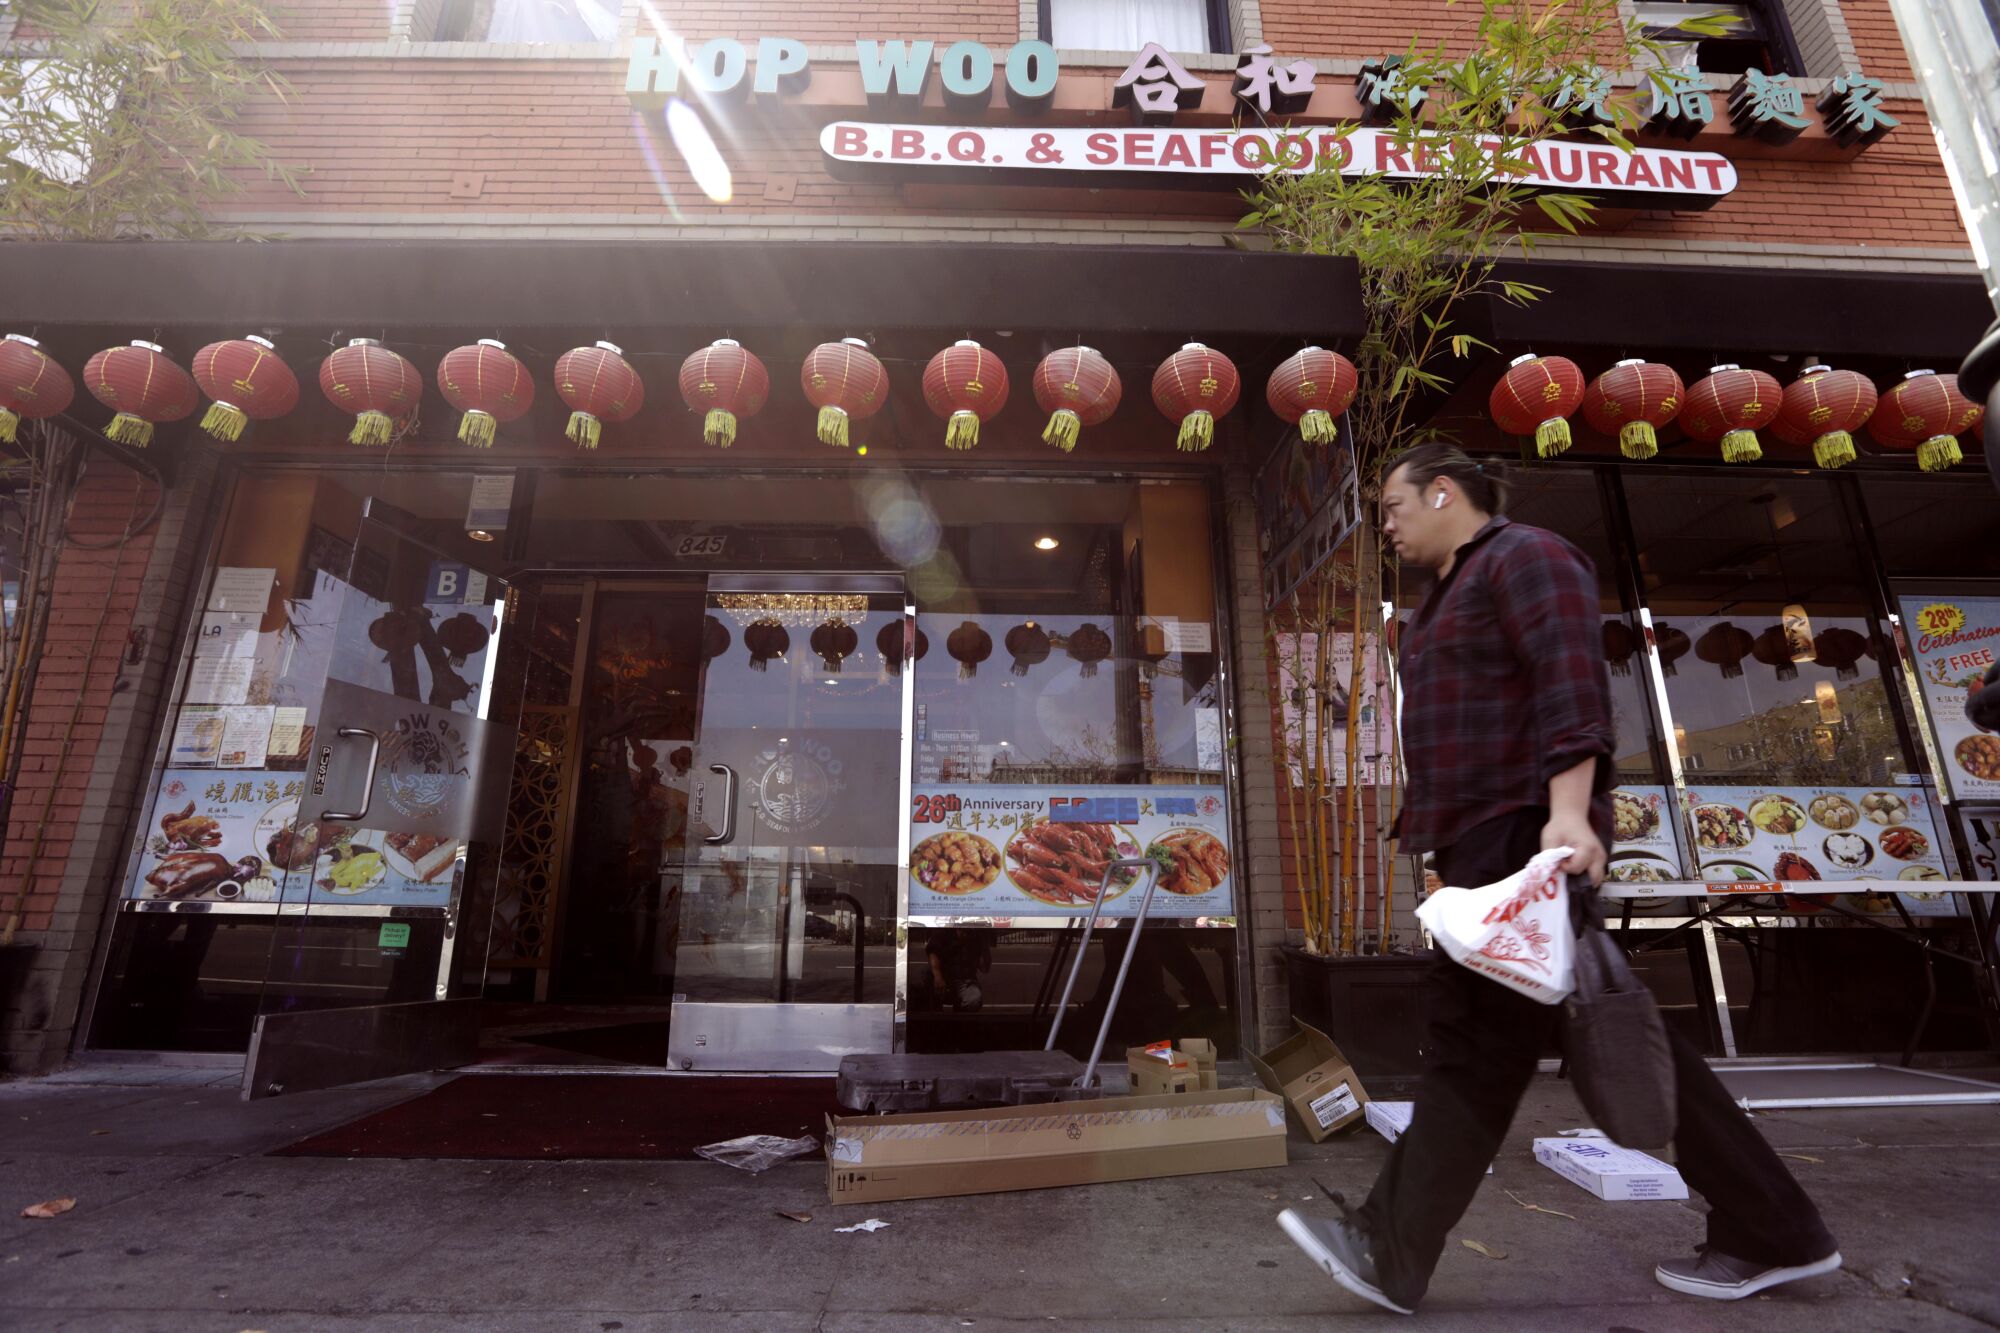 A person walks by the Hop Woo restaurant in Chinatown